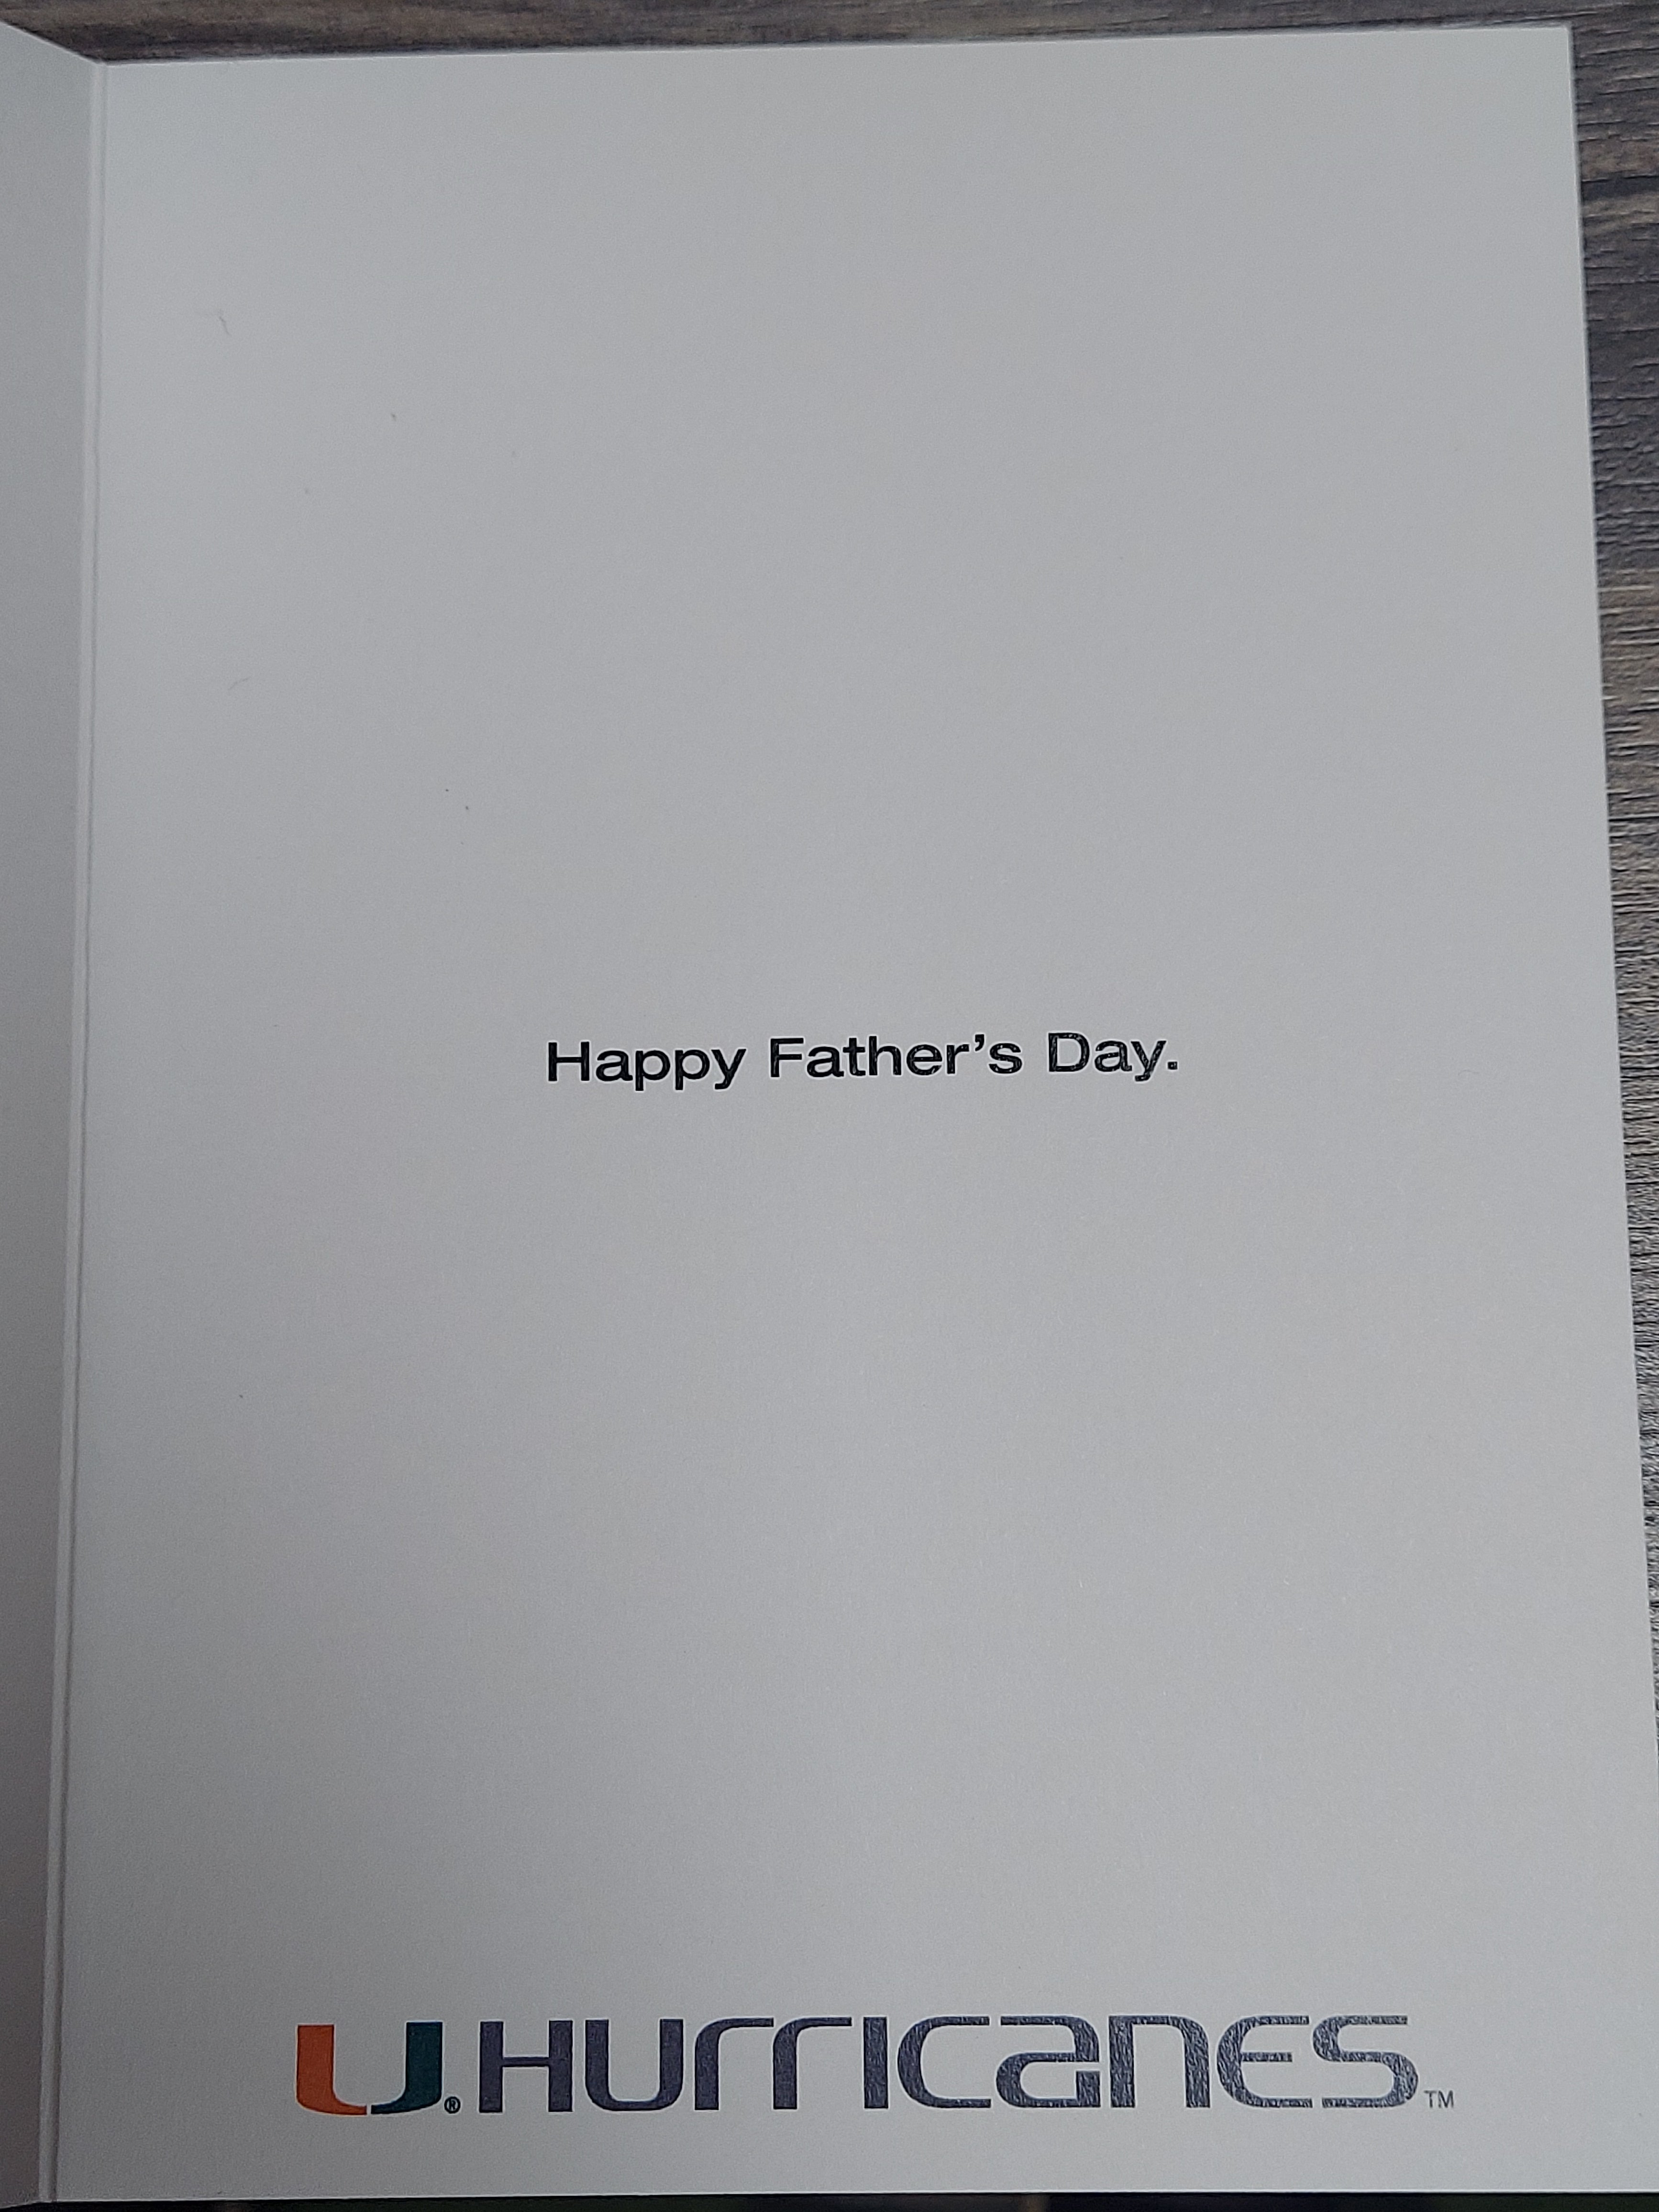 Happy Father's Day Card - #1 Dad